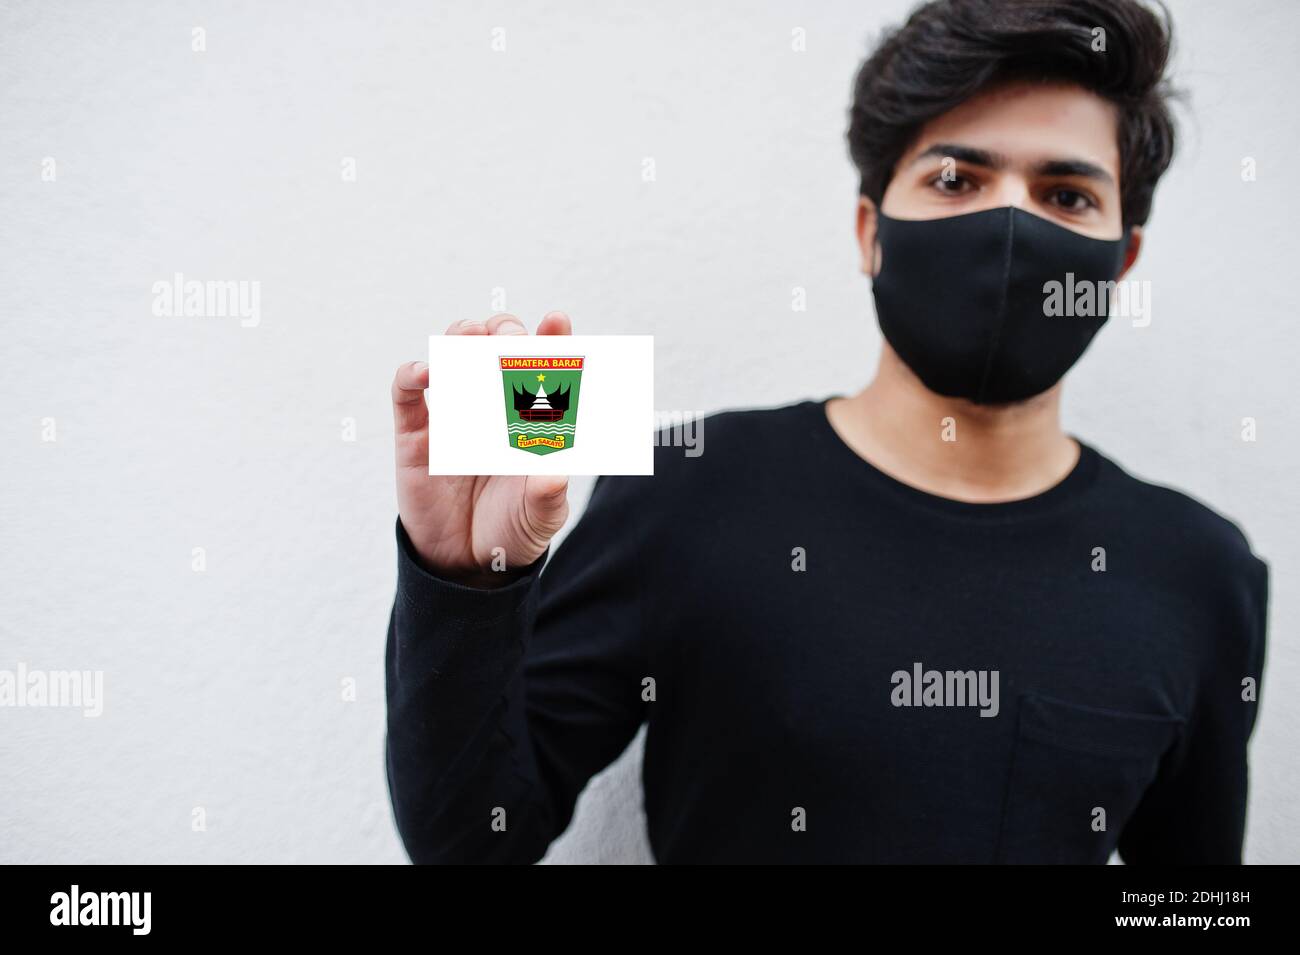 Indonesian man wear all black with face mask hold West Sumatra flag in hand isolated on white background. Provinces of Indonesia coronavirus concept. Stock Photo